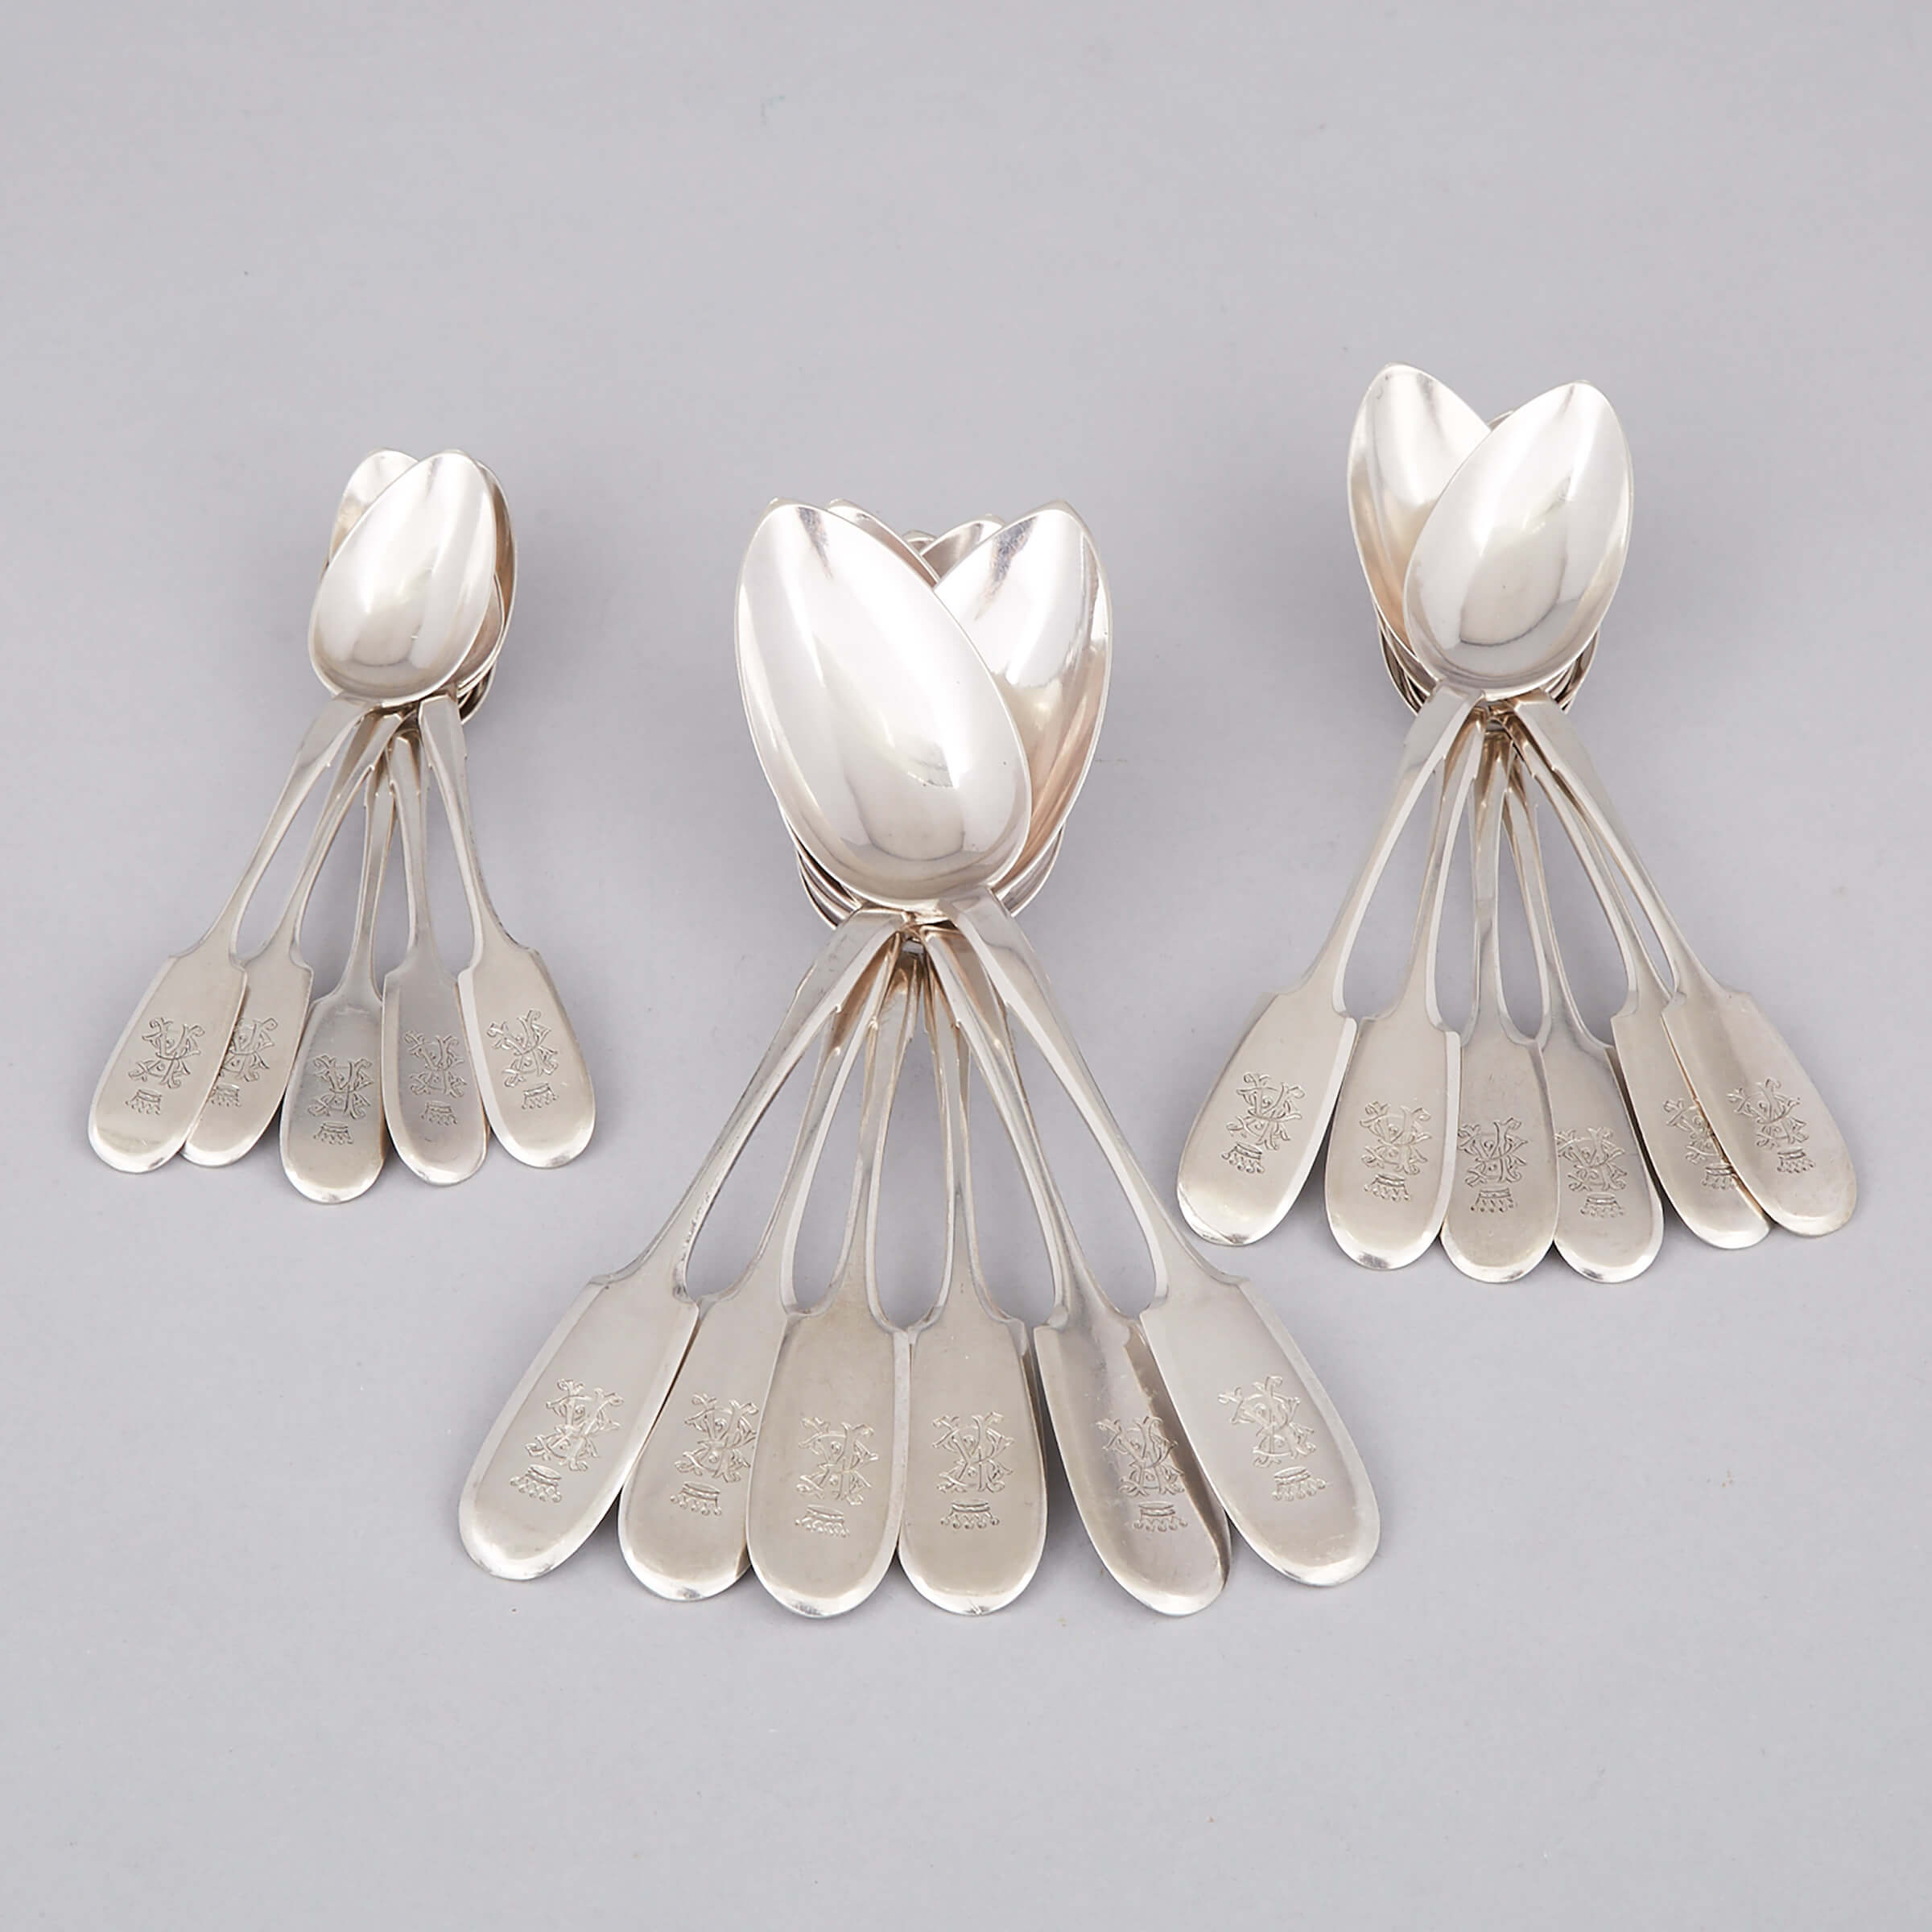 Six Russian Silver Fiddle Pattern Table Spoons, Six Dessert Spoons and Five Tea Spoons, St. Petersburg, c.1808-17